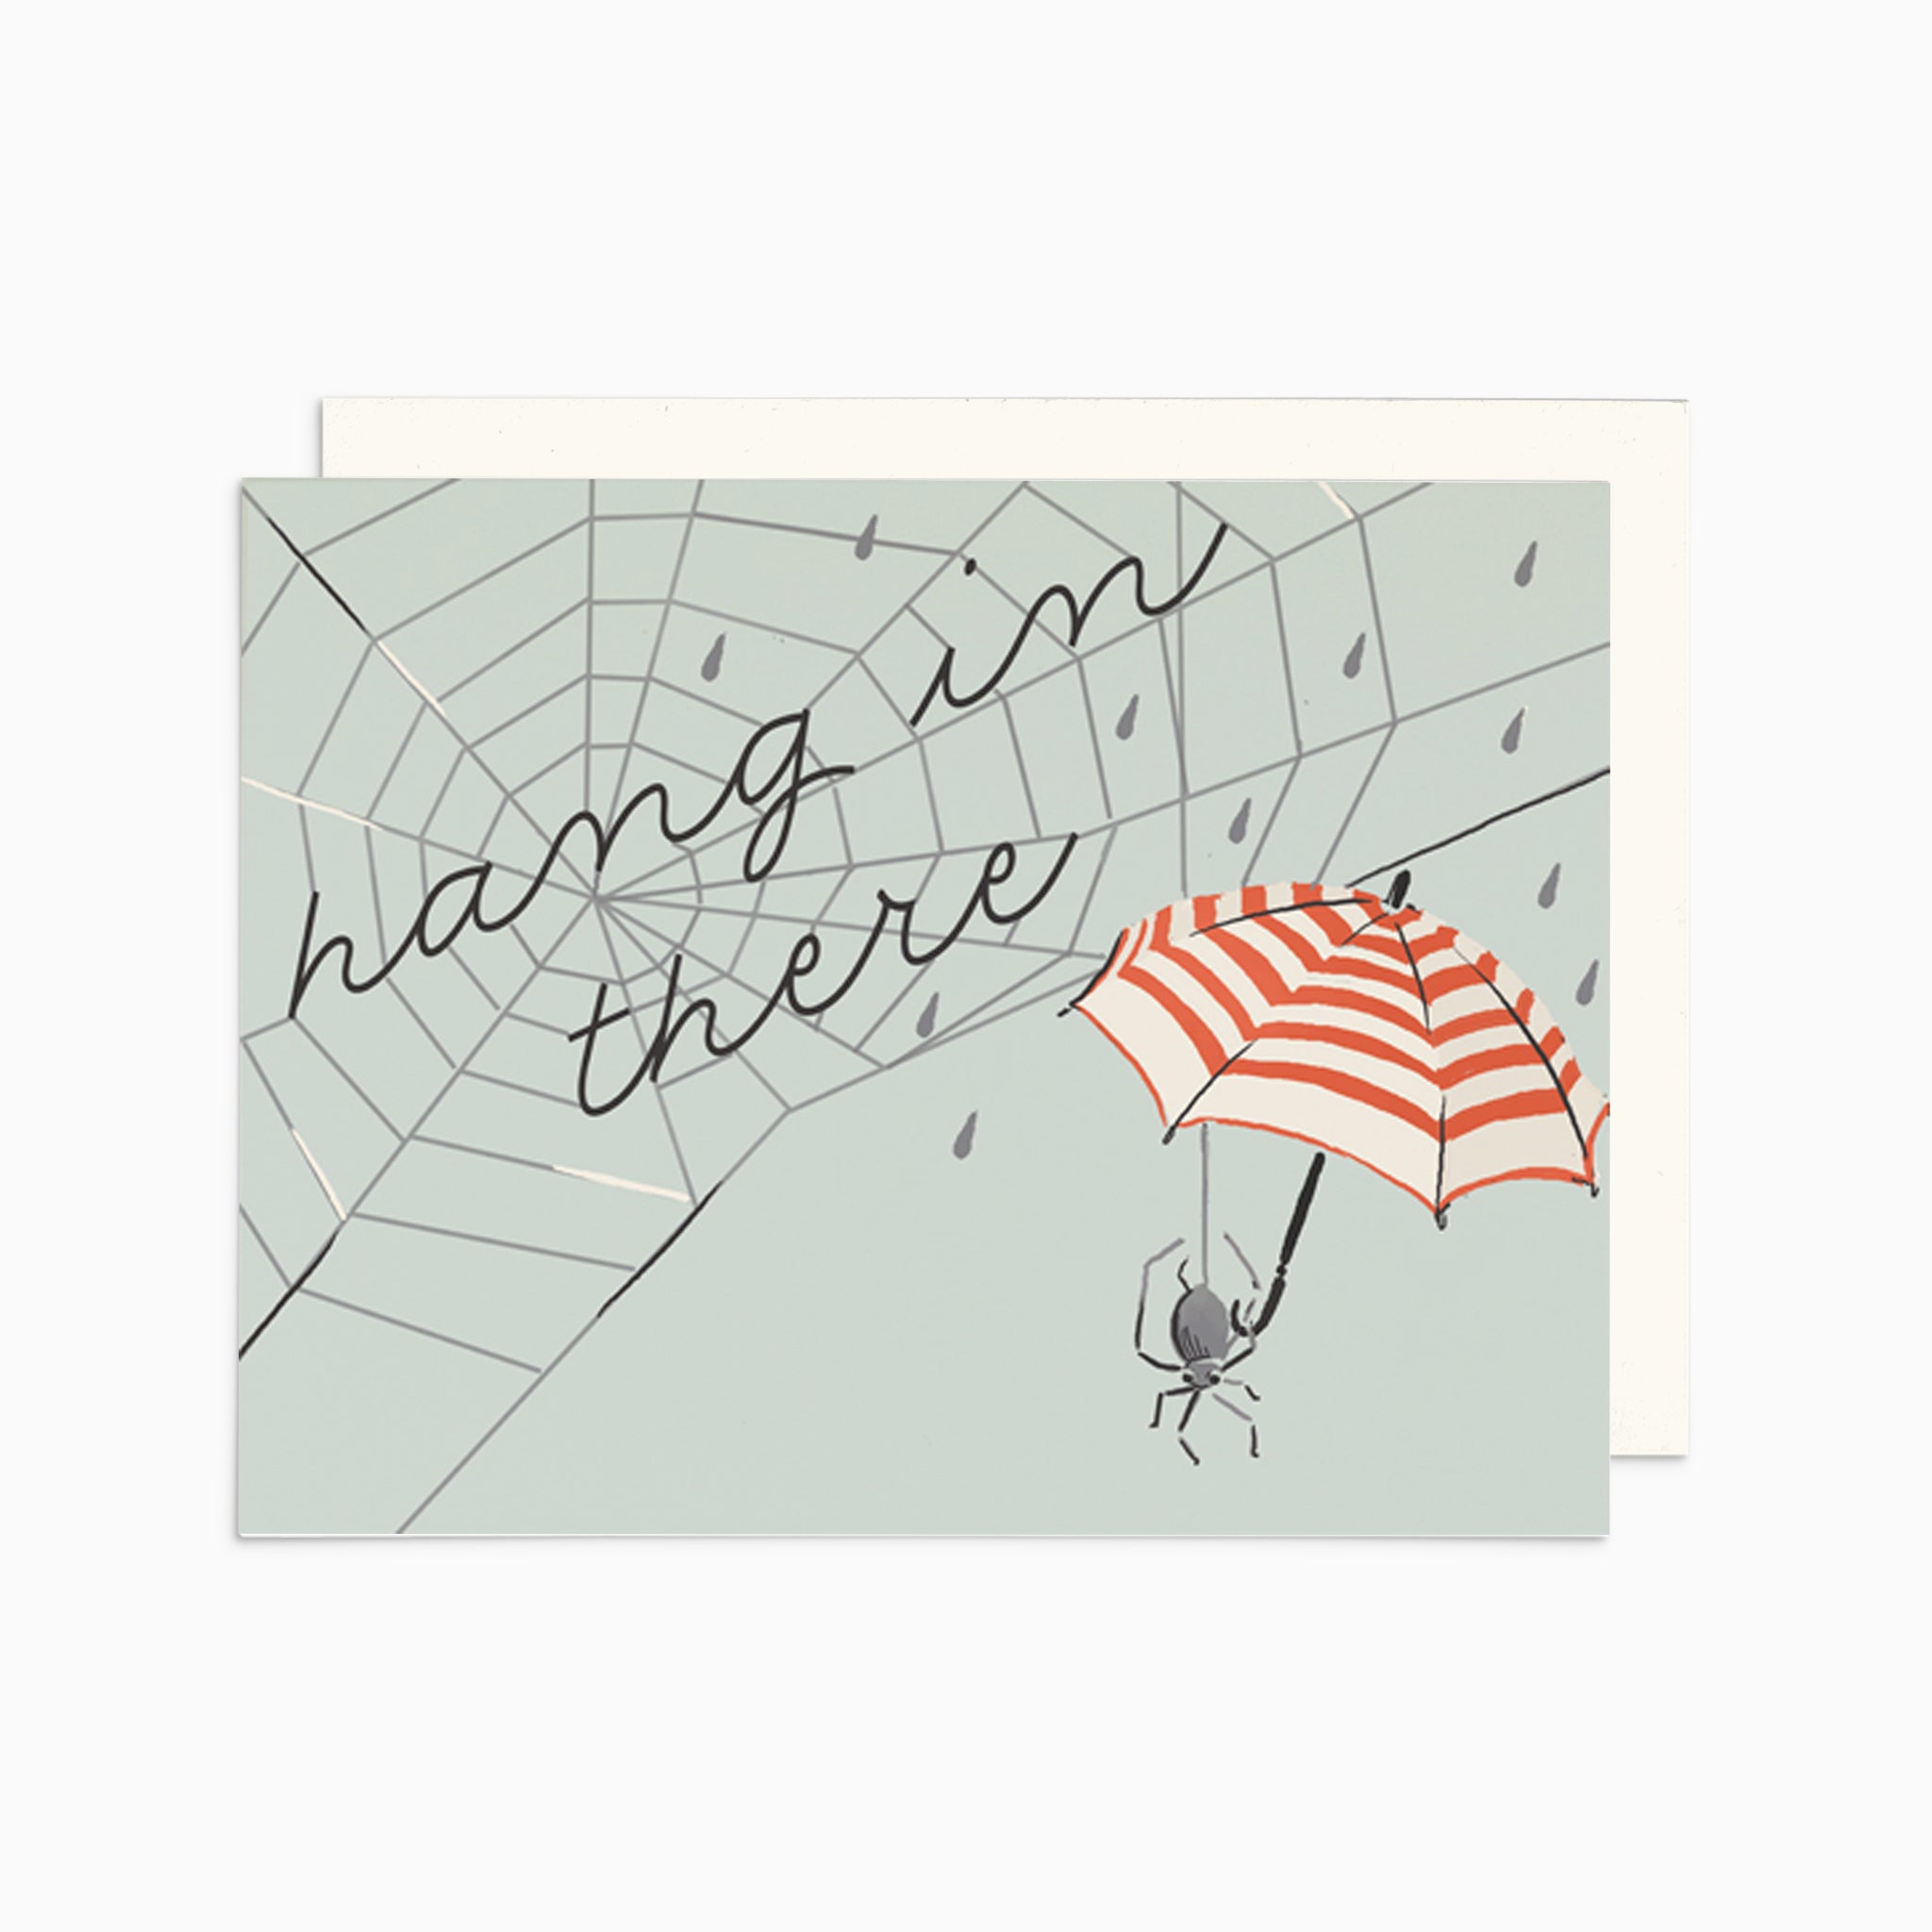 Illustrated sympathy card on premium warm white cardstock, featuring a spider web with the words 'Hang in There' and a spider holding a red and white striped umbrella on a pale blue background.